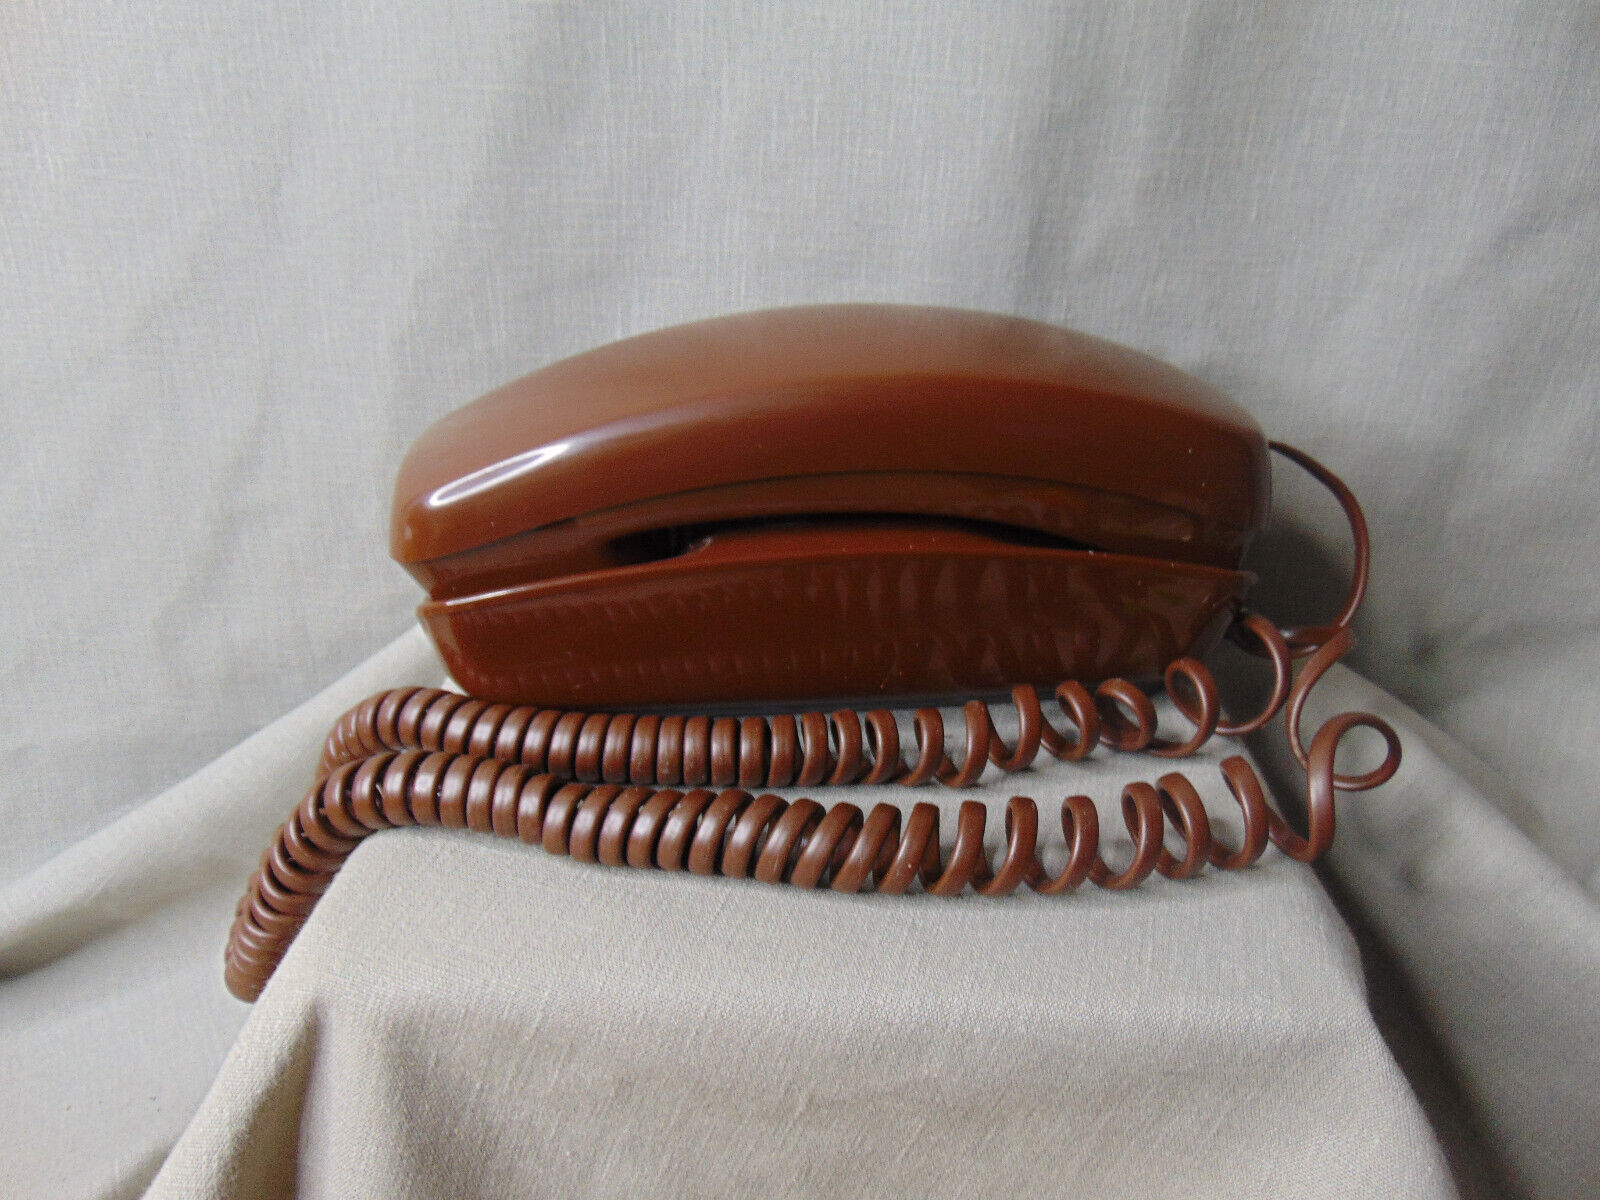 Vintage American Bell Trimline Western Electric Brown Push button Phone